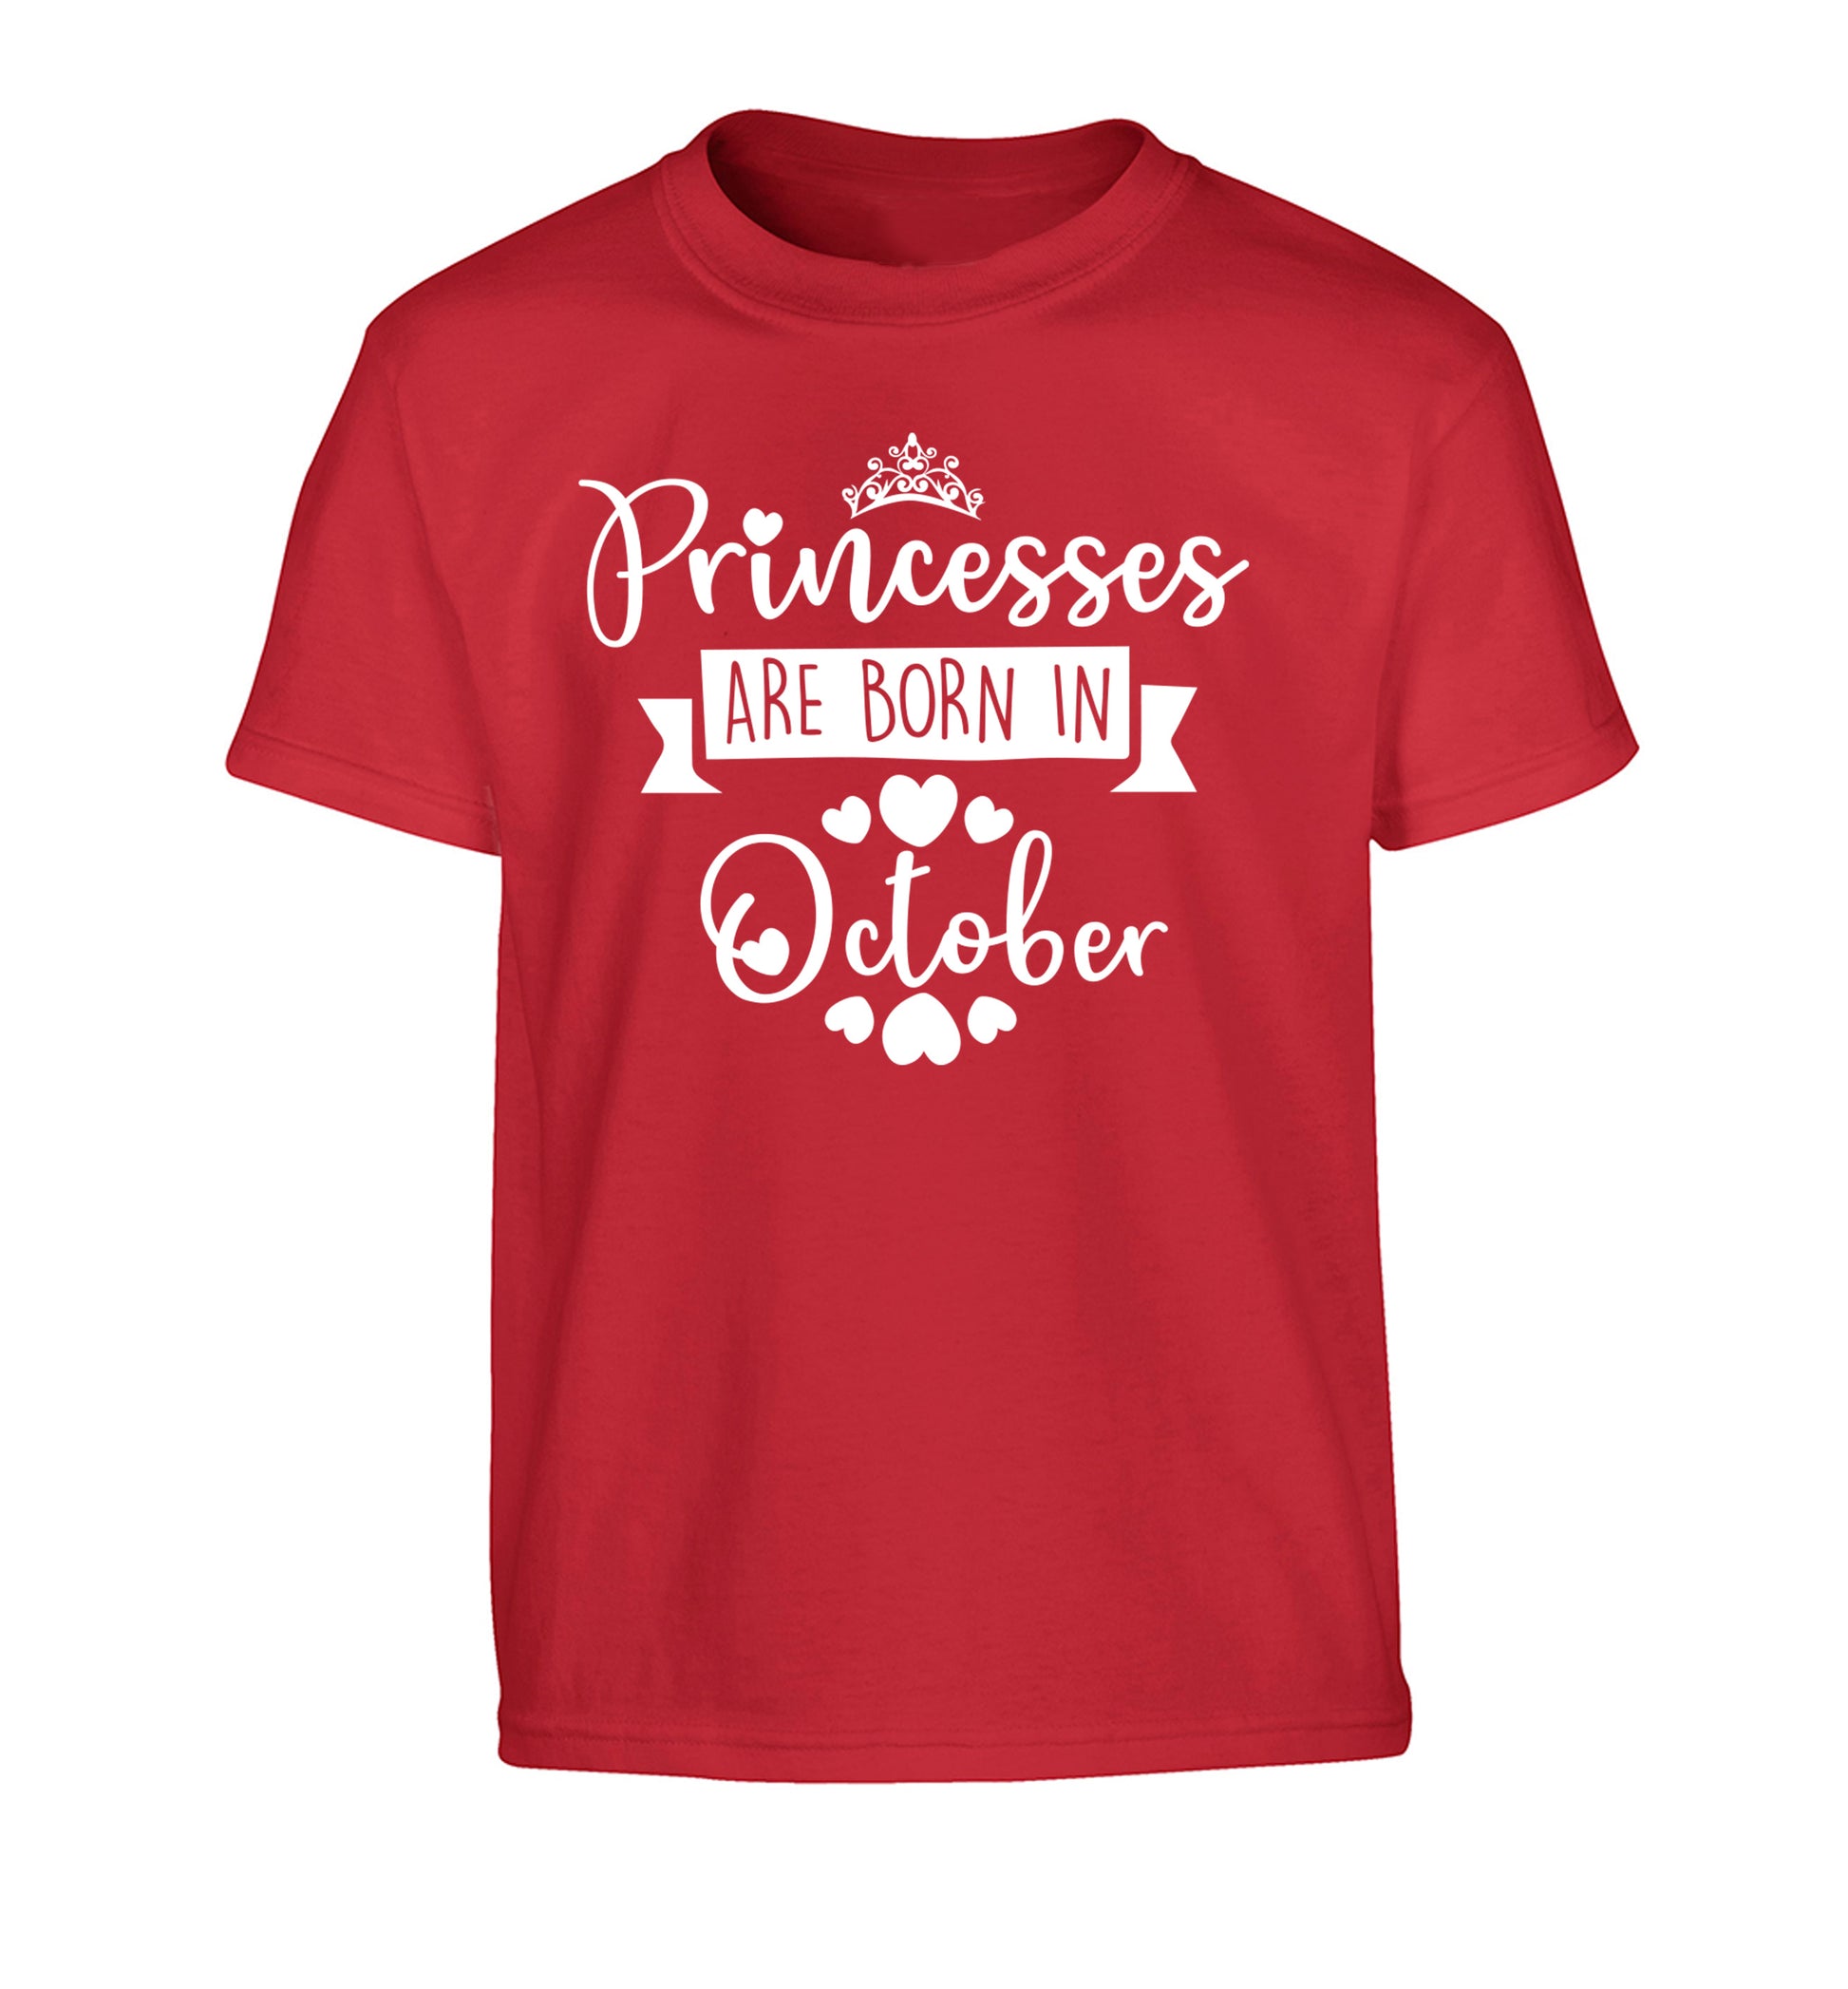 Princesses are born in October Children's red Tshirt 12-13 Years